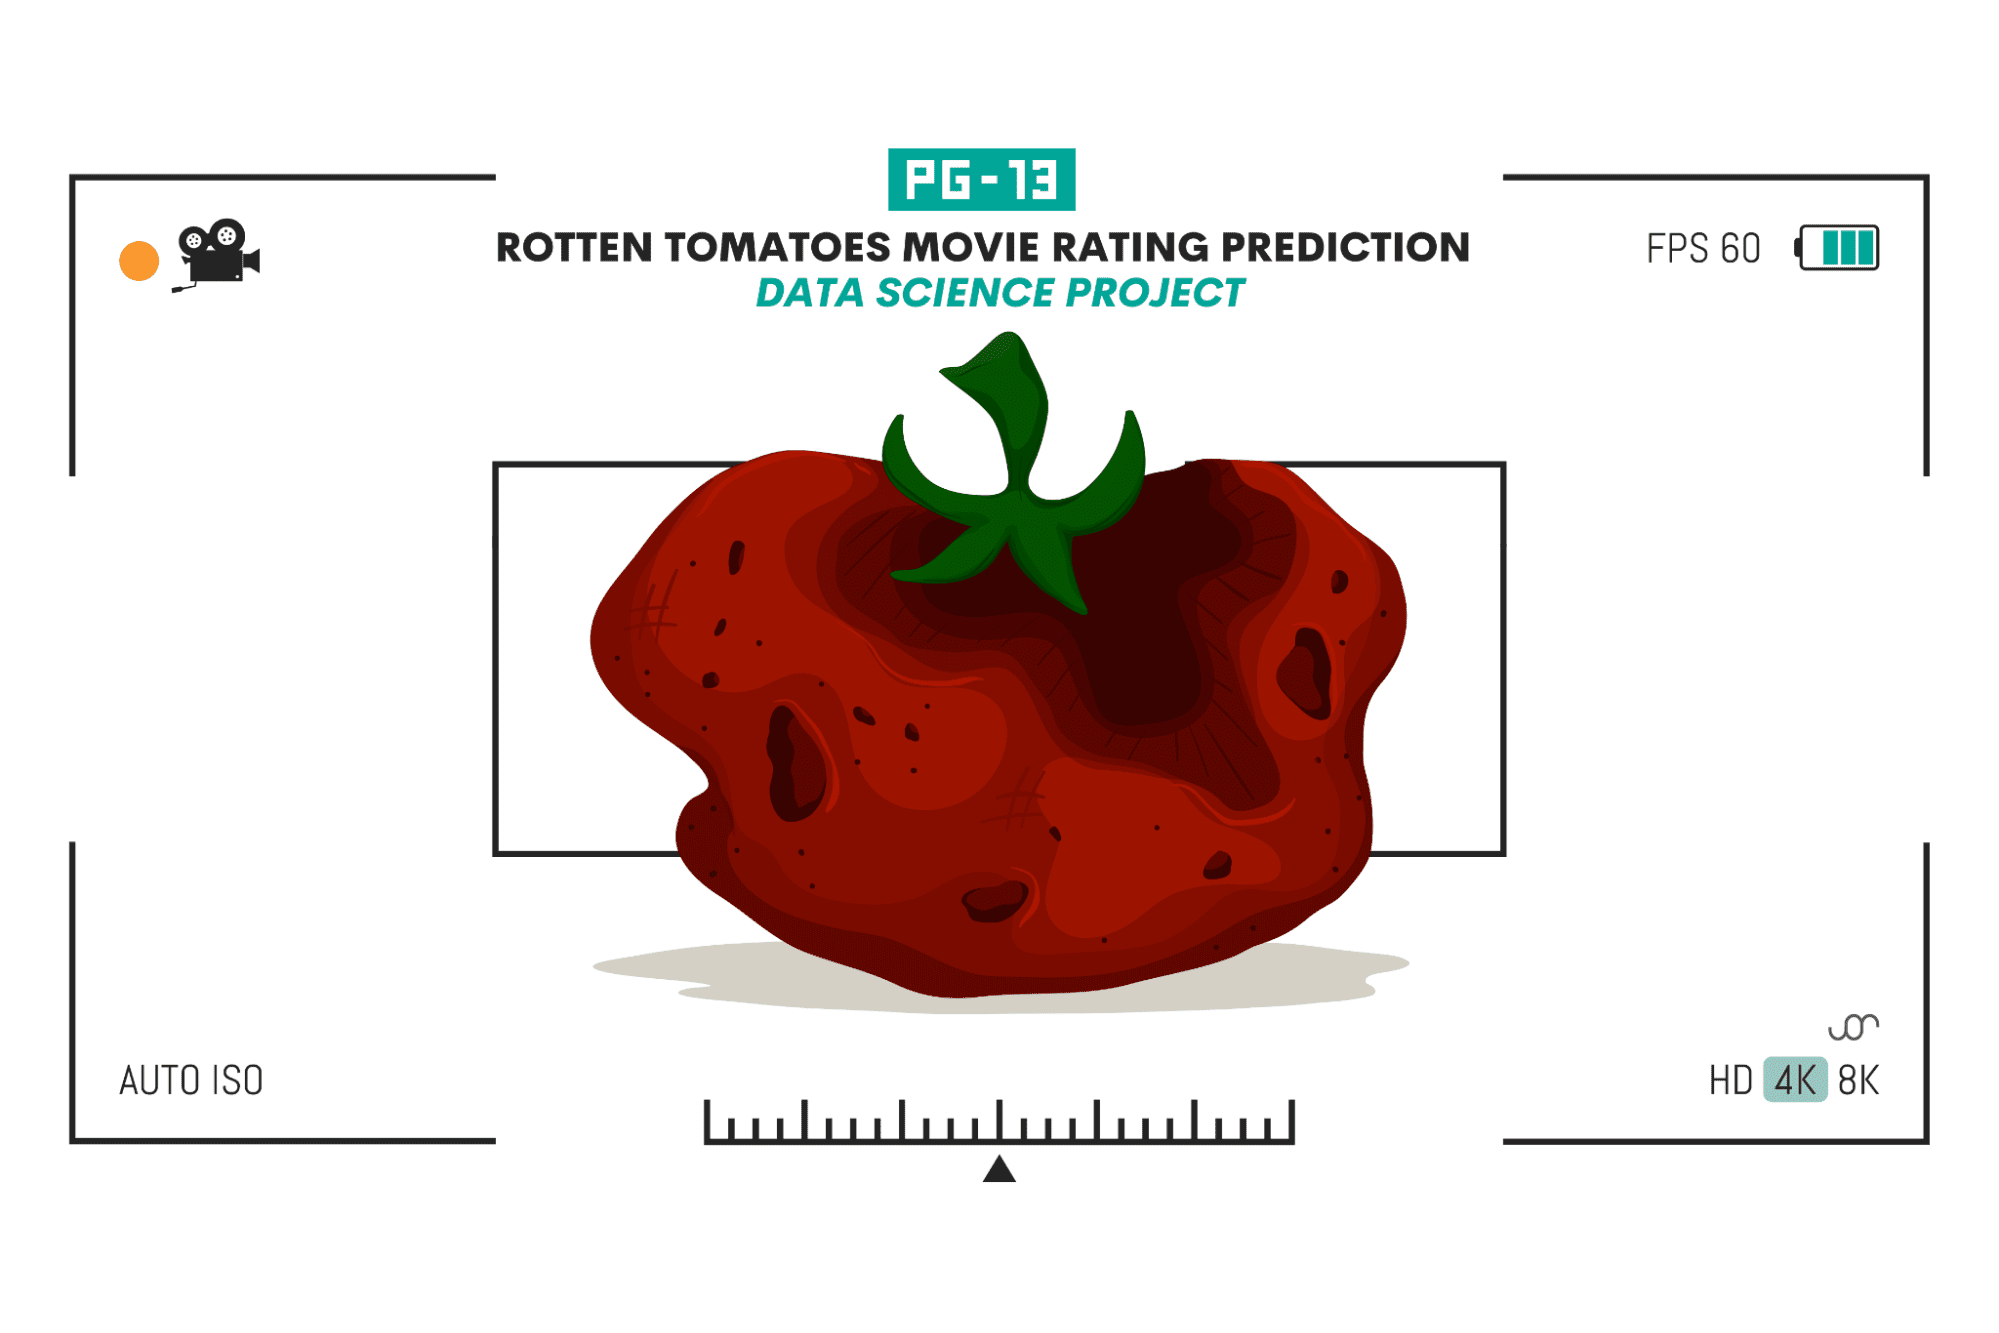 The 99% : Rotten Tomatoes' Top Rated Movies